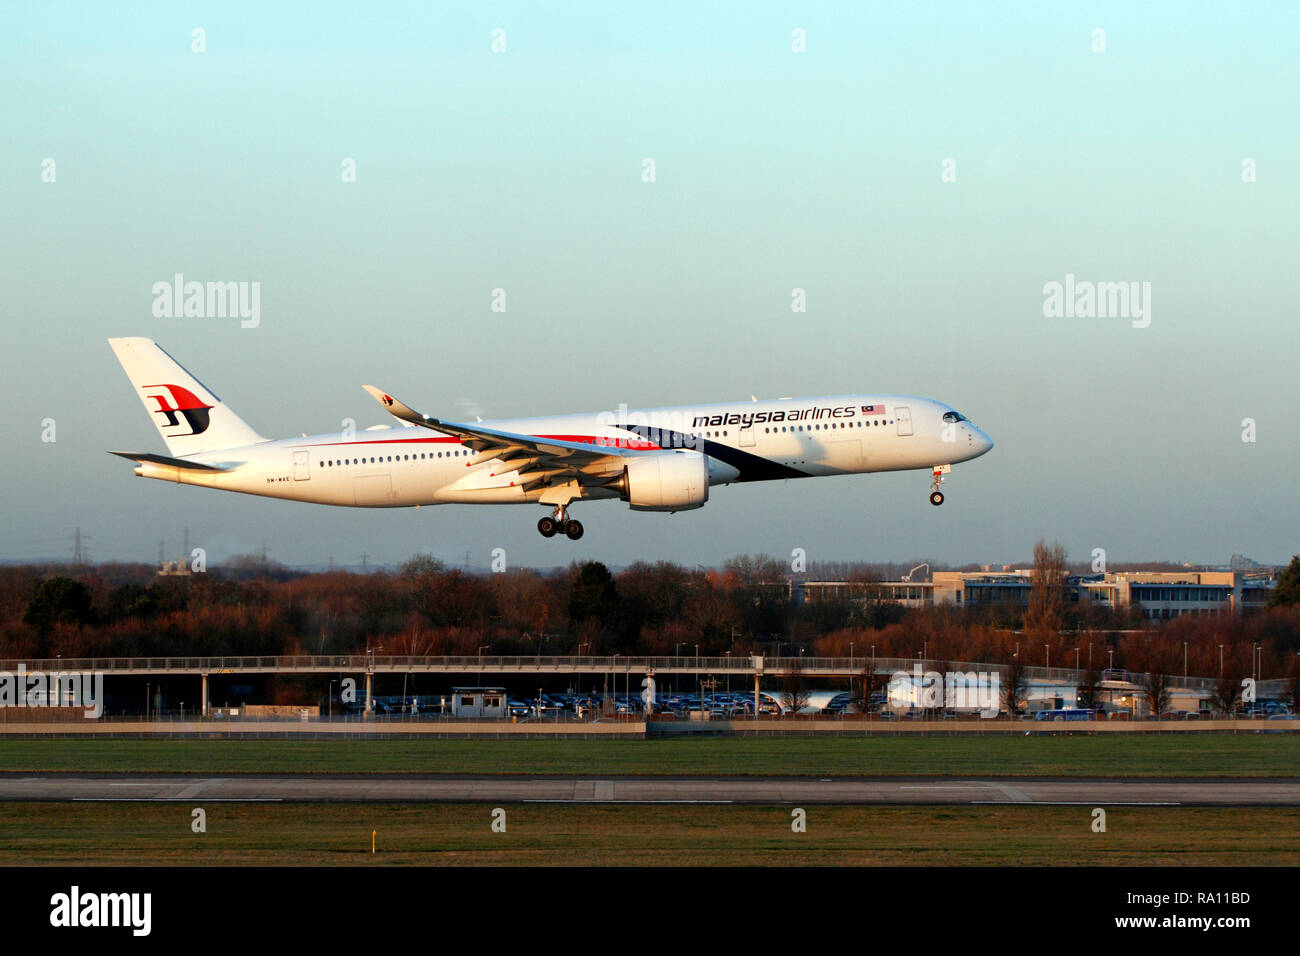 Malaysia Airlines Airbus A350-900, 9M-MAE landing at Heathrow, airport, London UK. Stock Photo